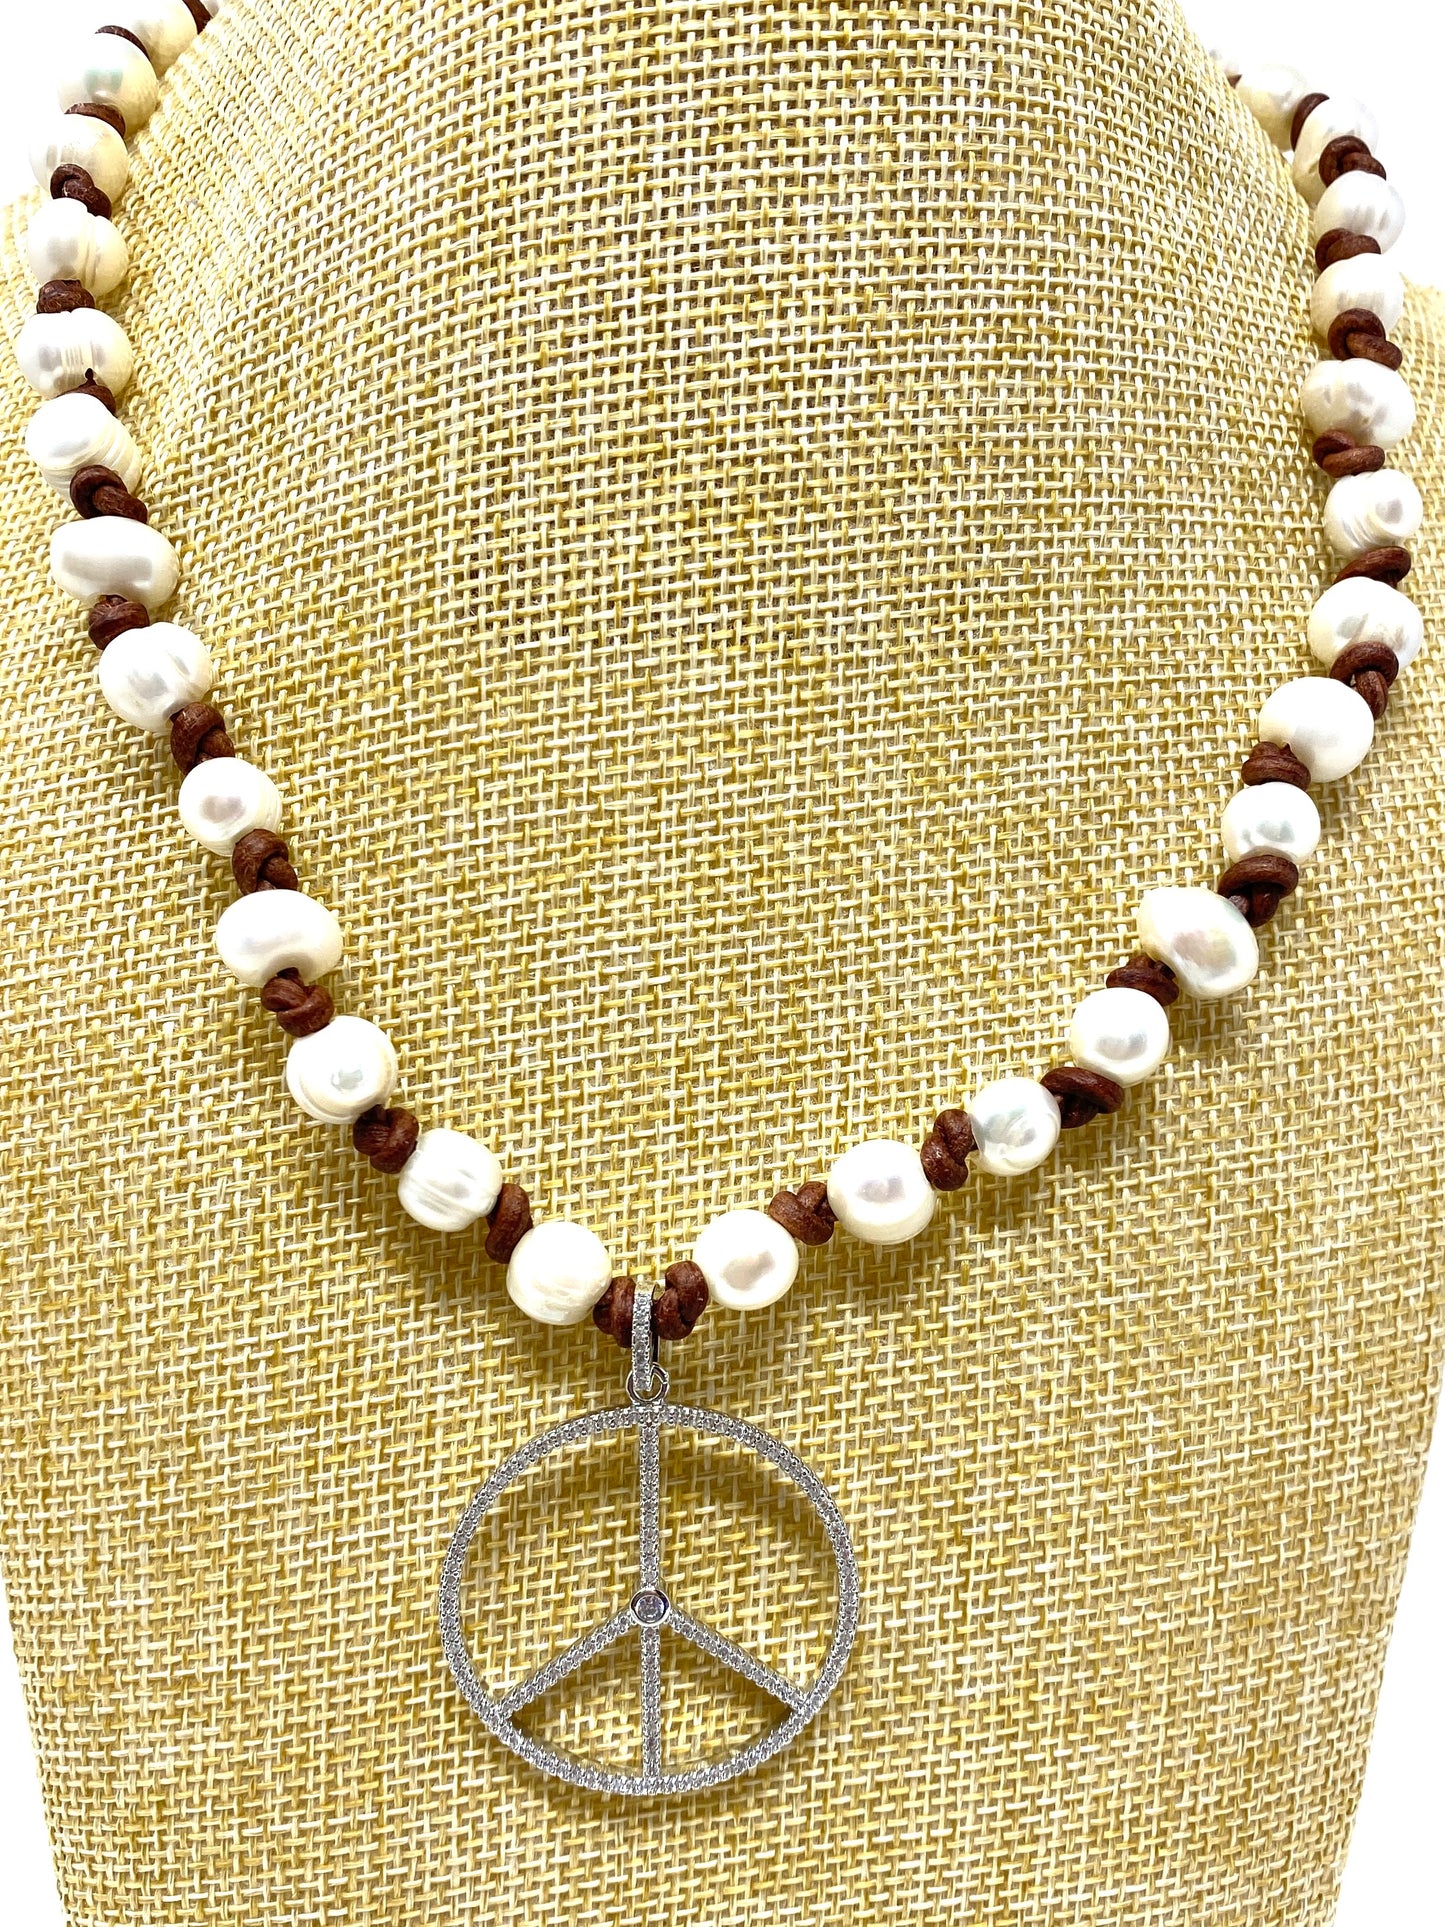 Brown Leather Knotted Freshwater Pearl Necklace With CZ Peace Sign Pendant